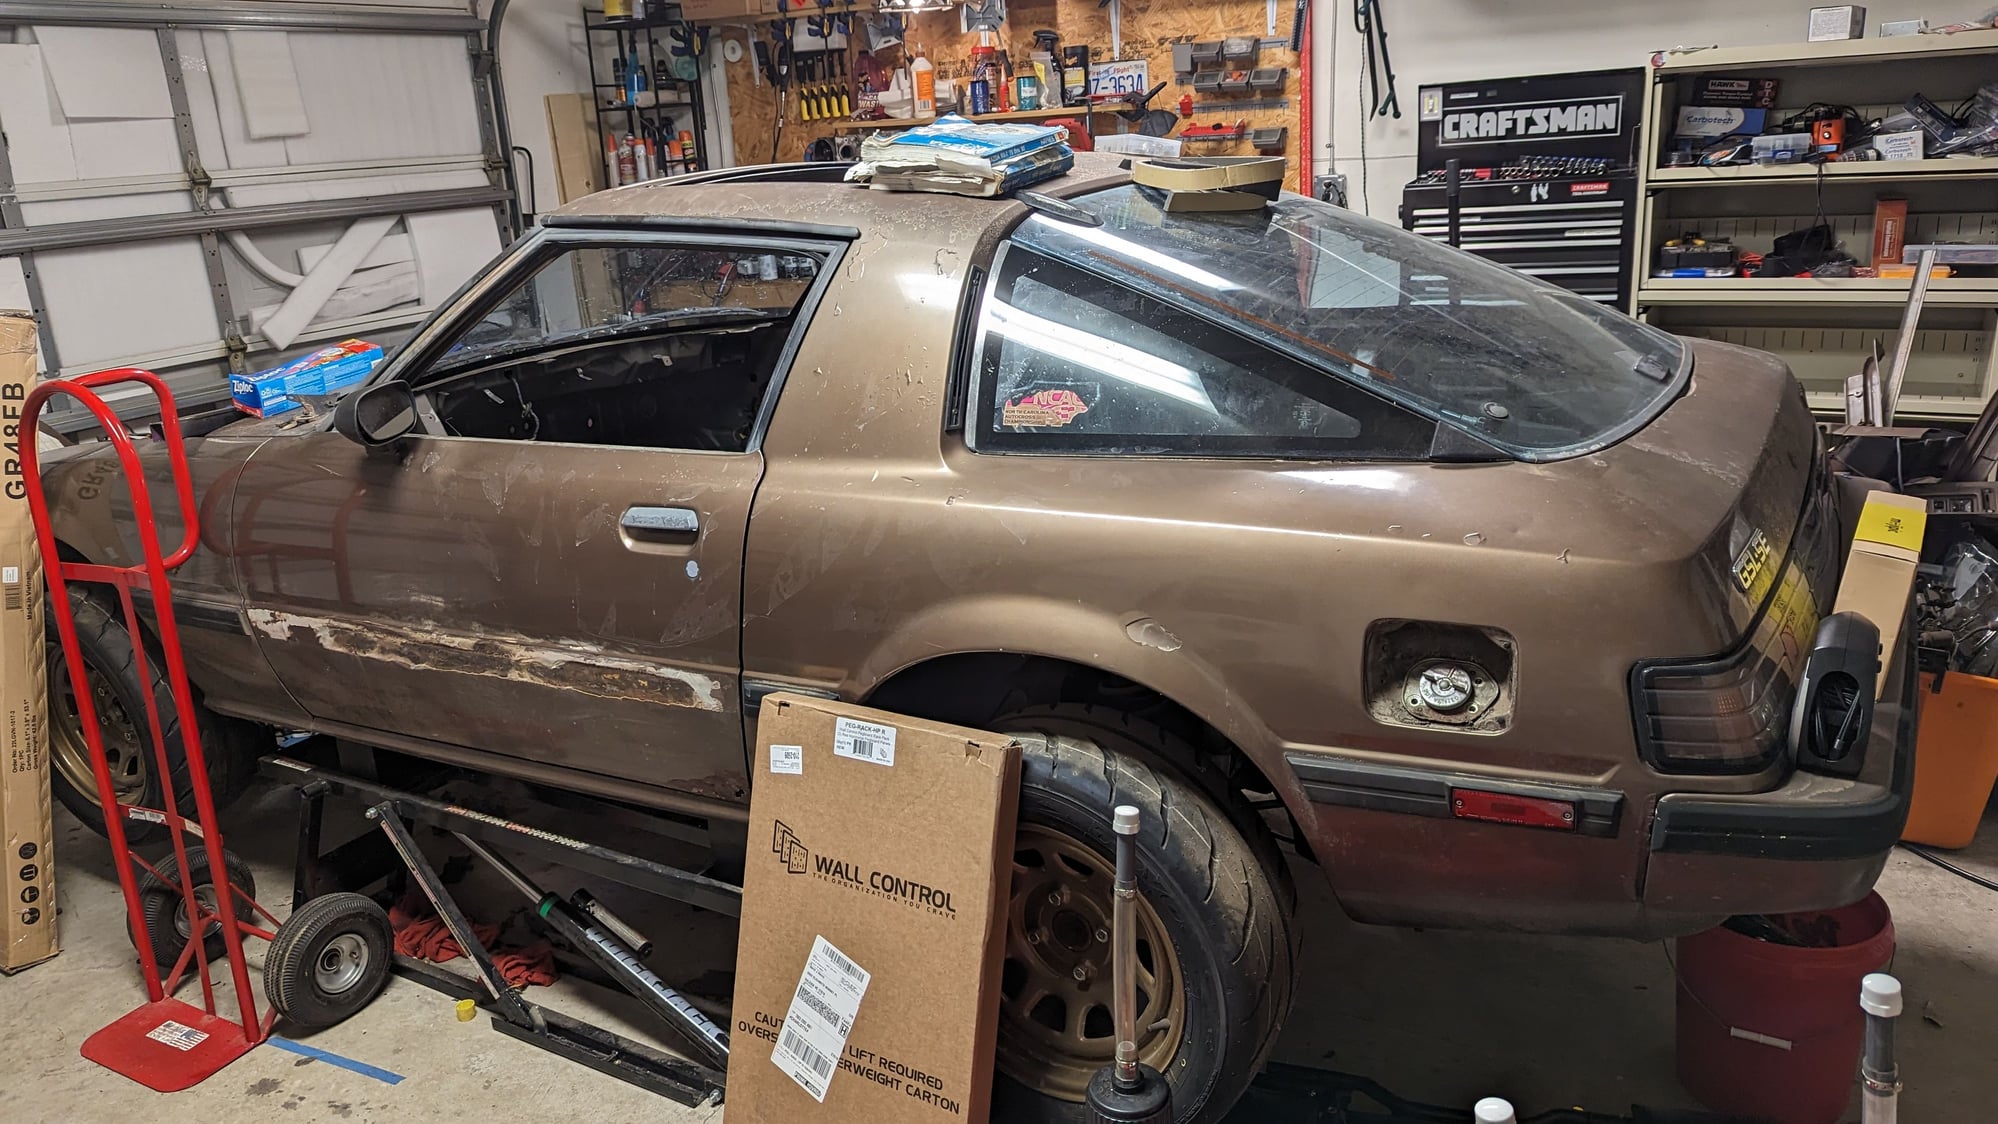 1985 Mazda RX-7 - brown gsl-se stuff - Miscellaneous - $1 - Raleigh, NC 27616, United States